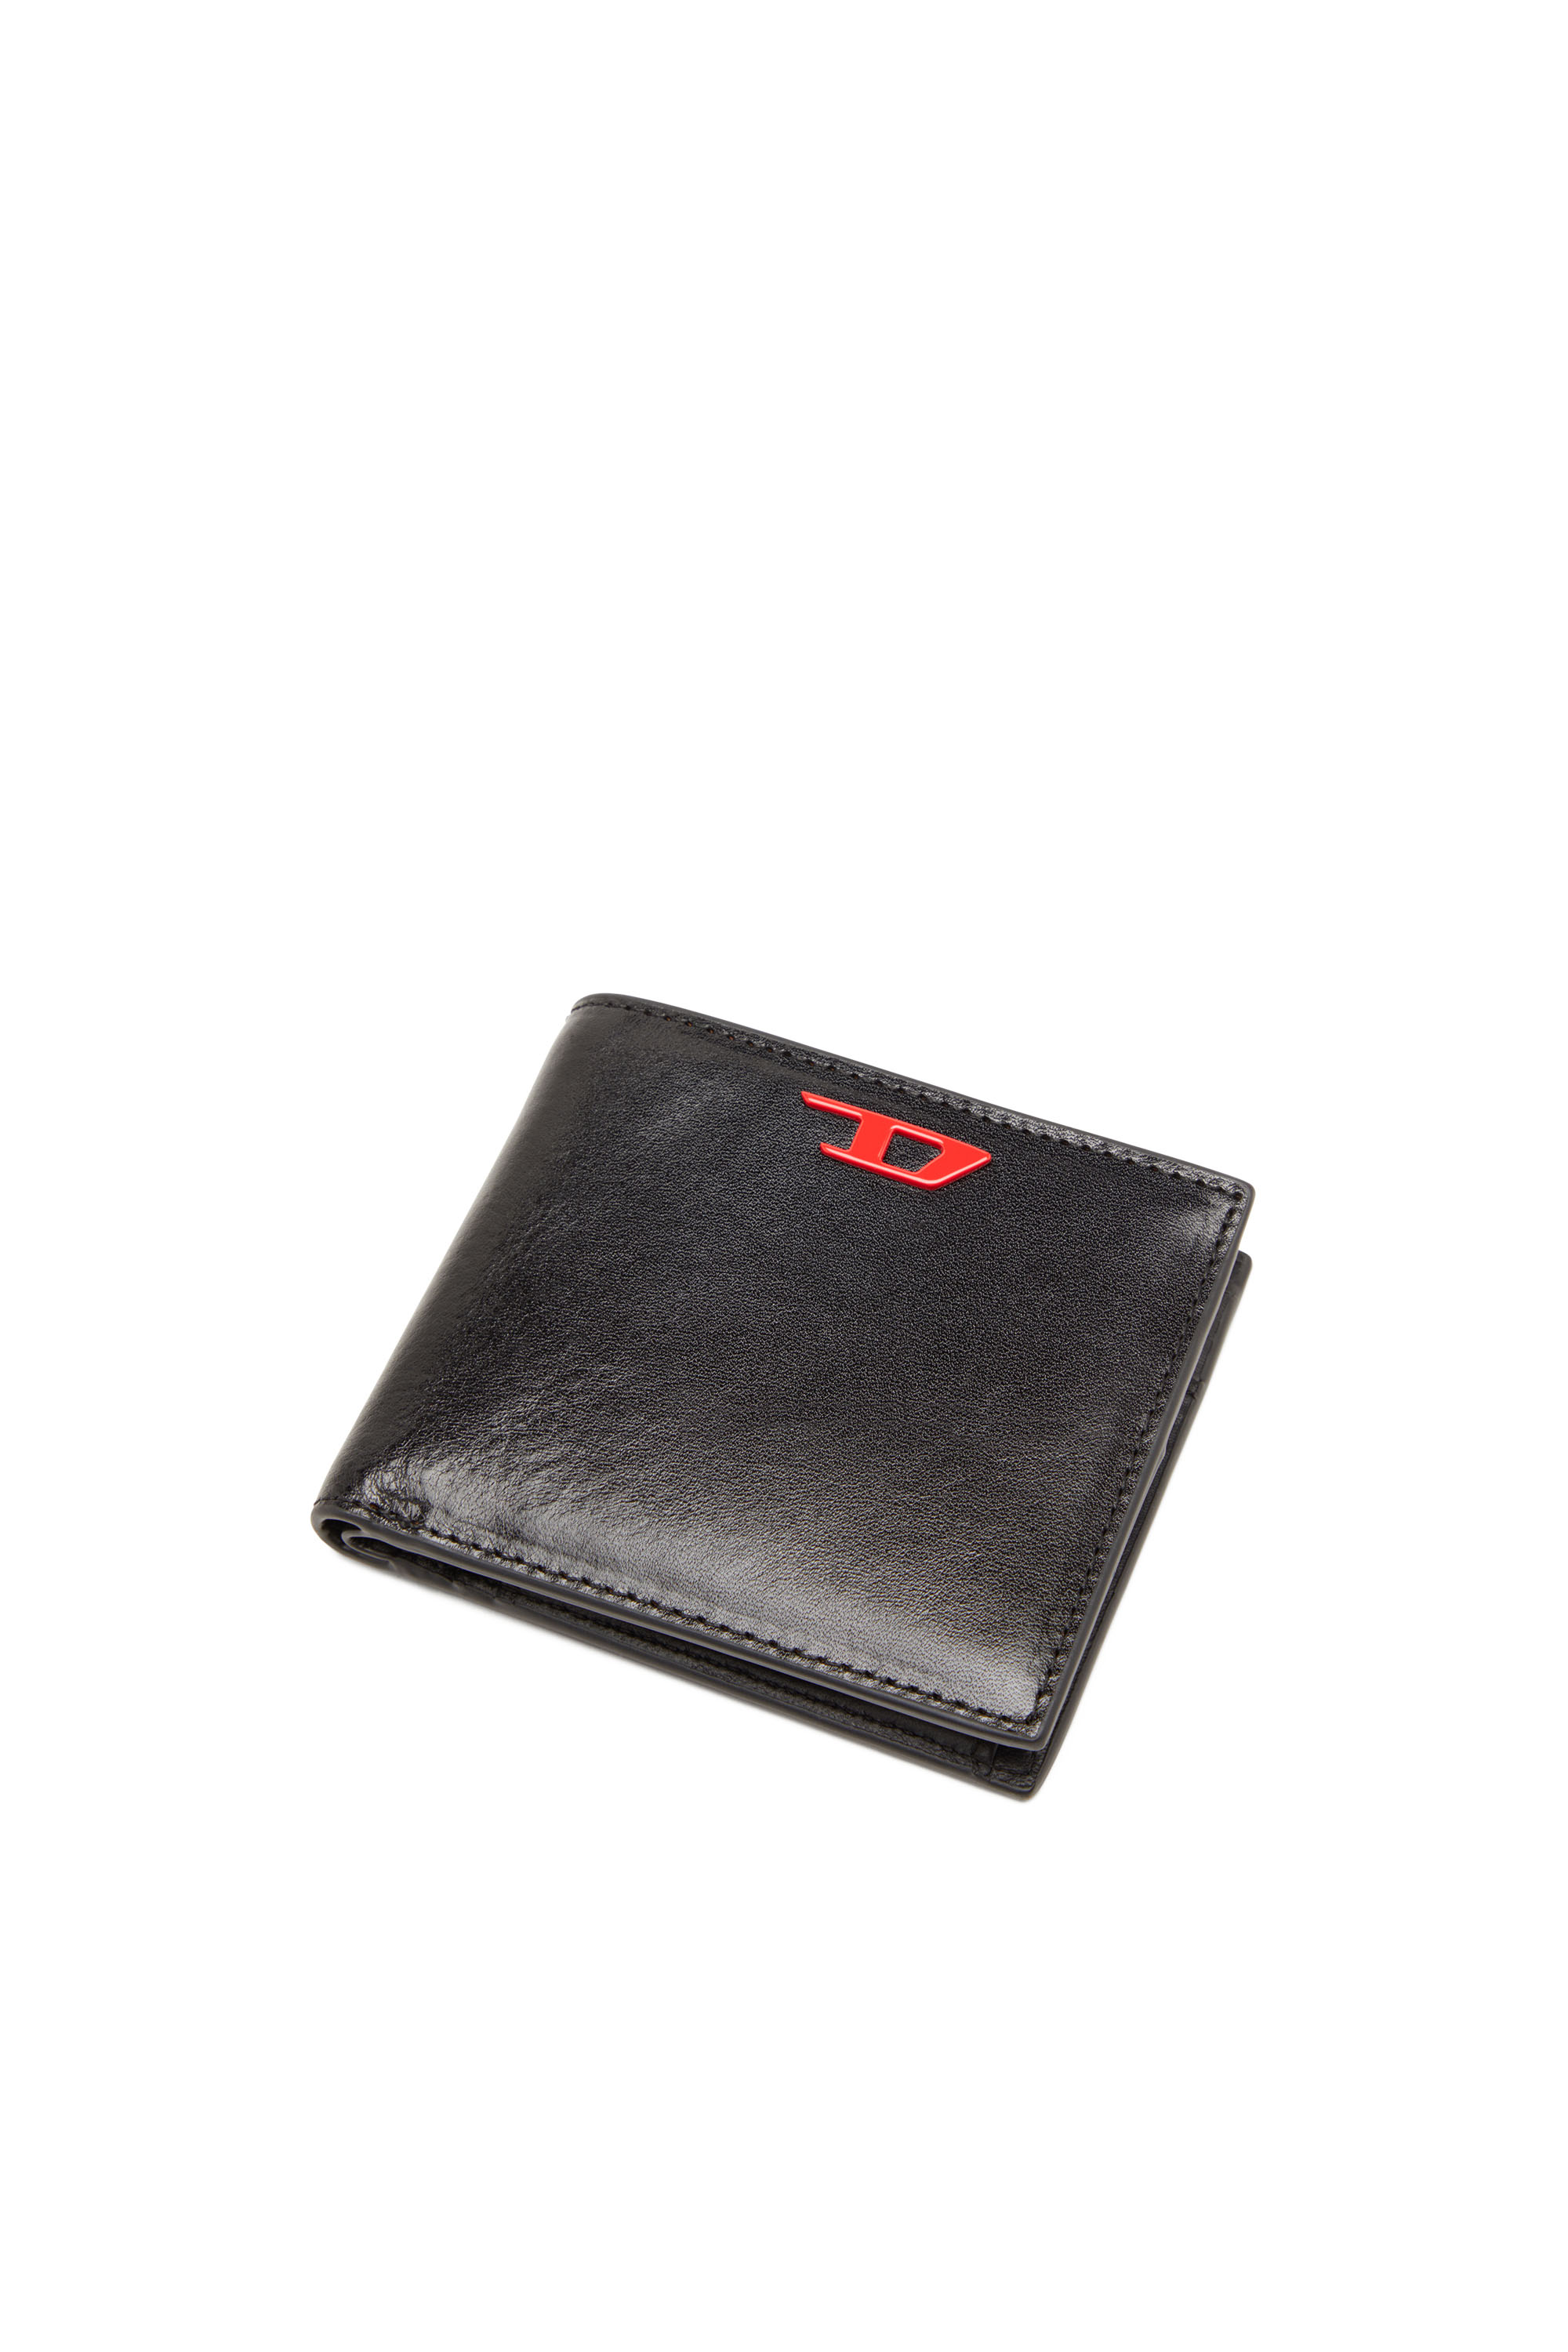 Diesel - RAVE BI-FOLD COIN S, Man Leather bi-fold wallet with red D plaque in Black - Image 4